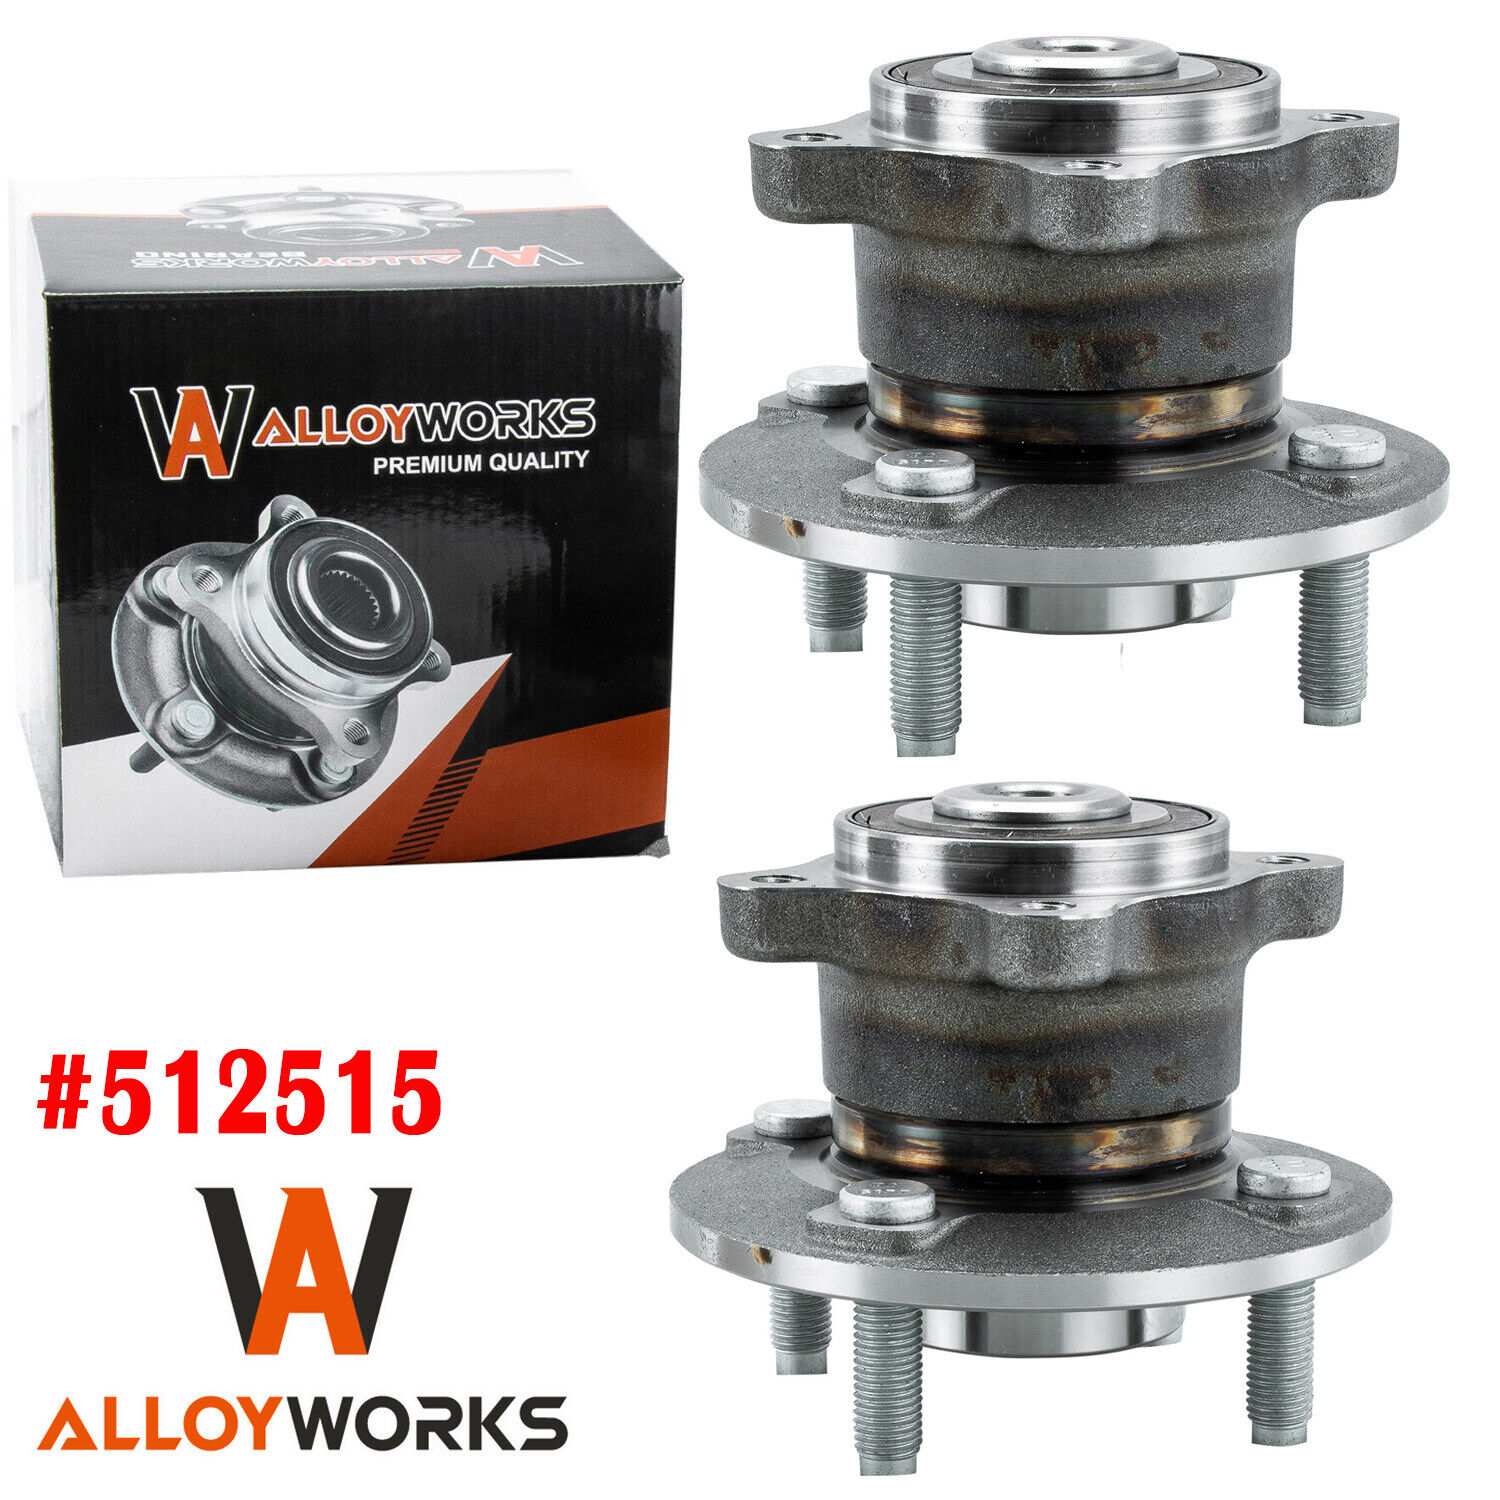 2pcs Rear Wheel Hub Bearing Assembly For 2014 2015 2016 Chevy Spark EV With ABS